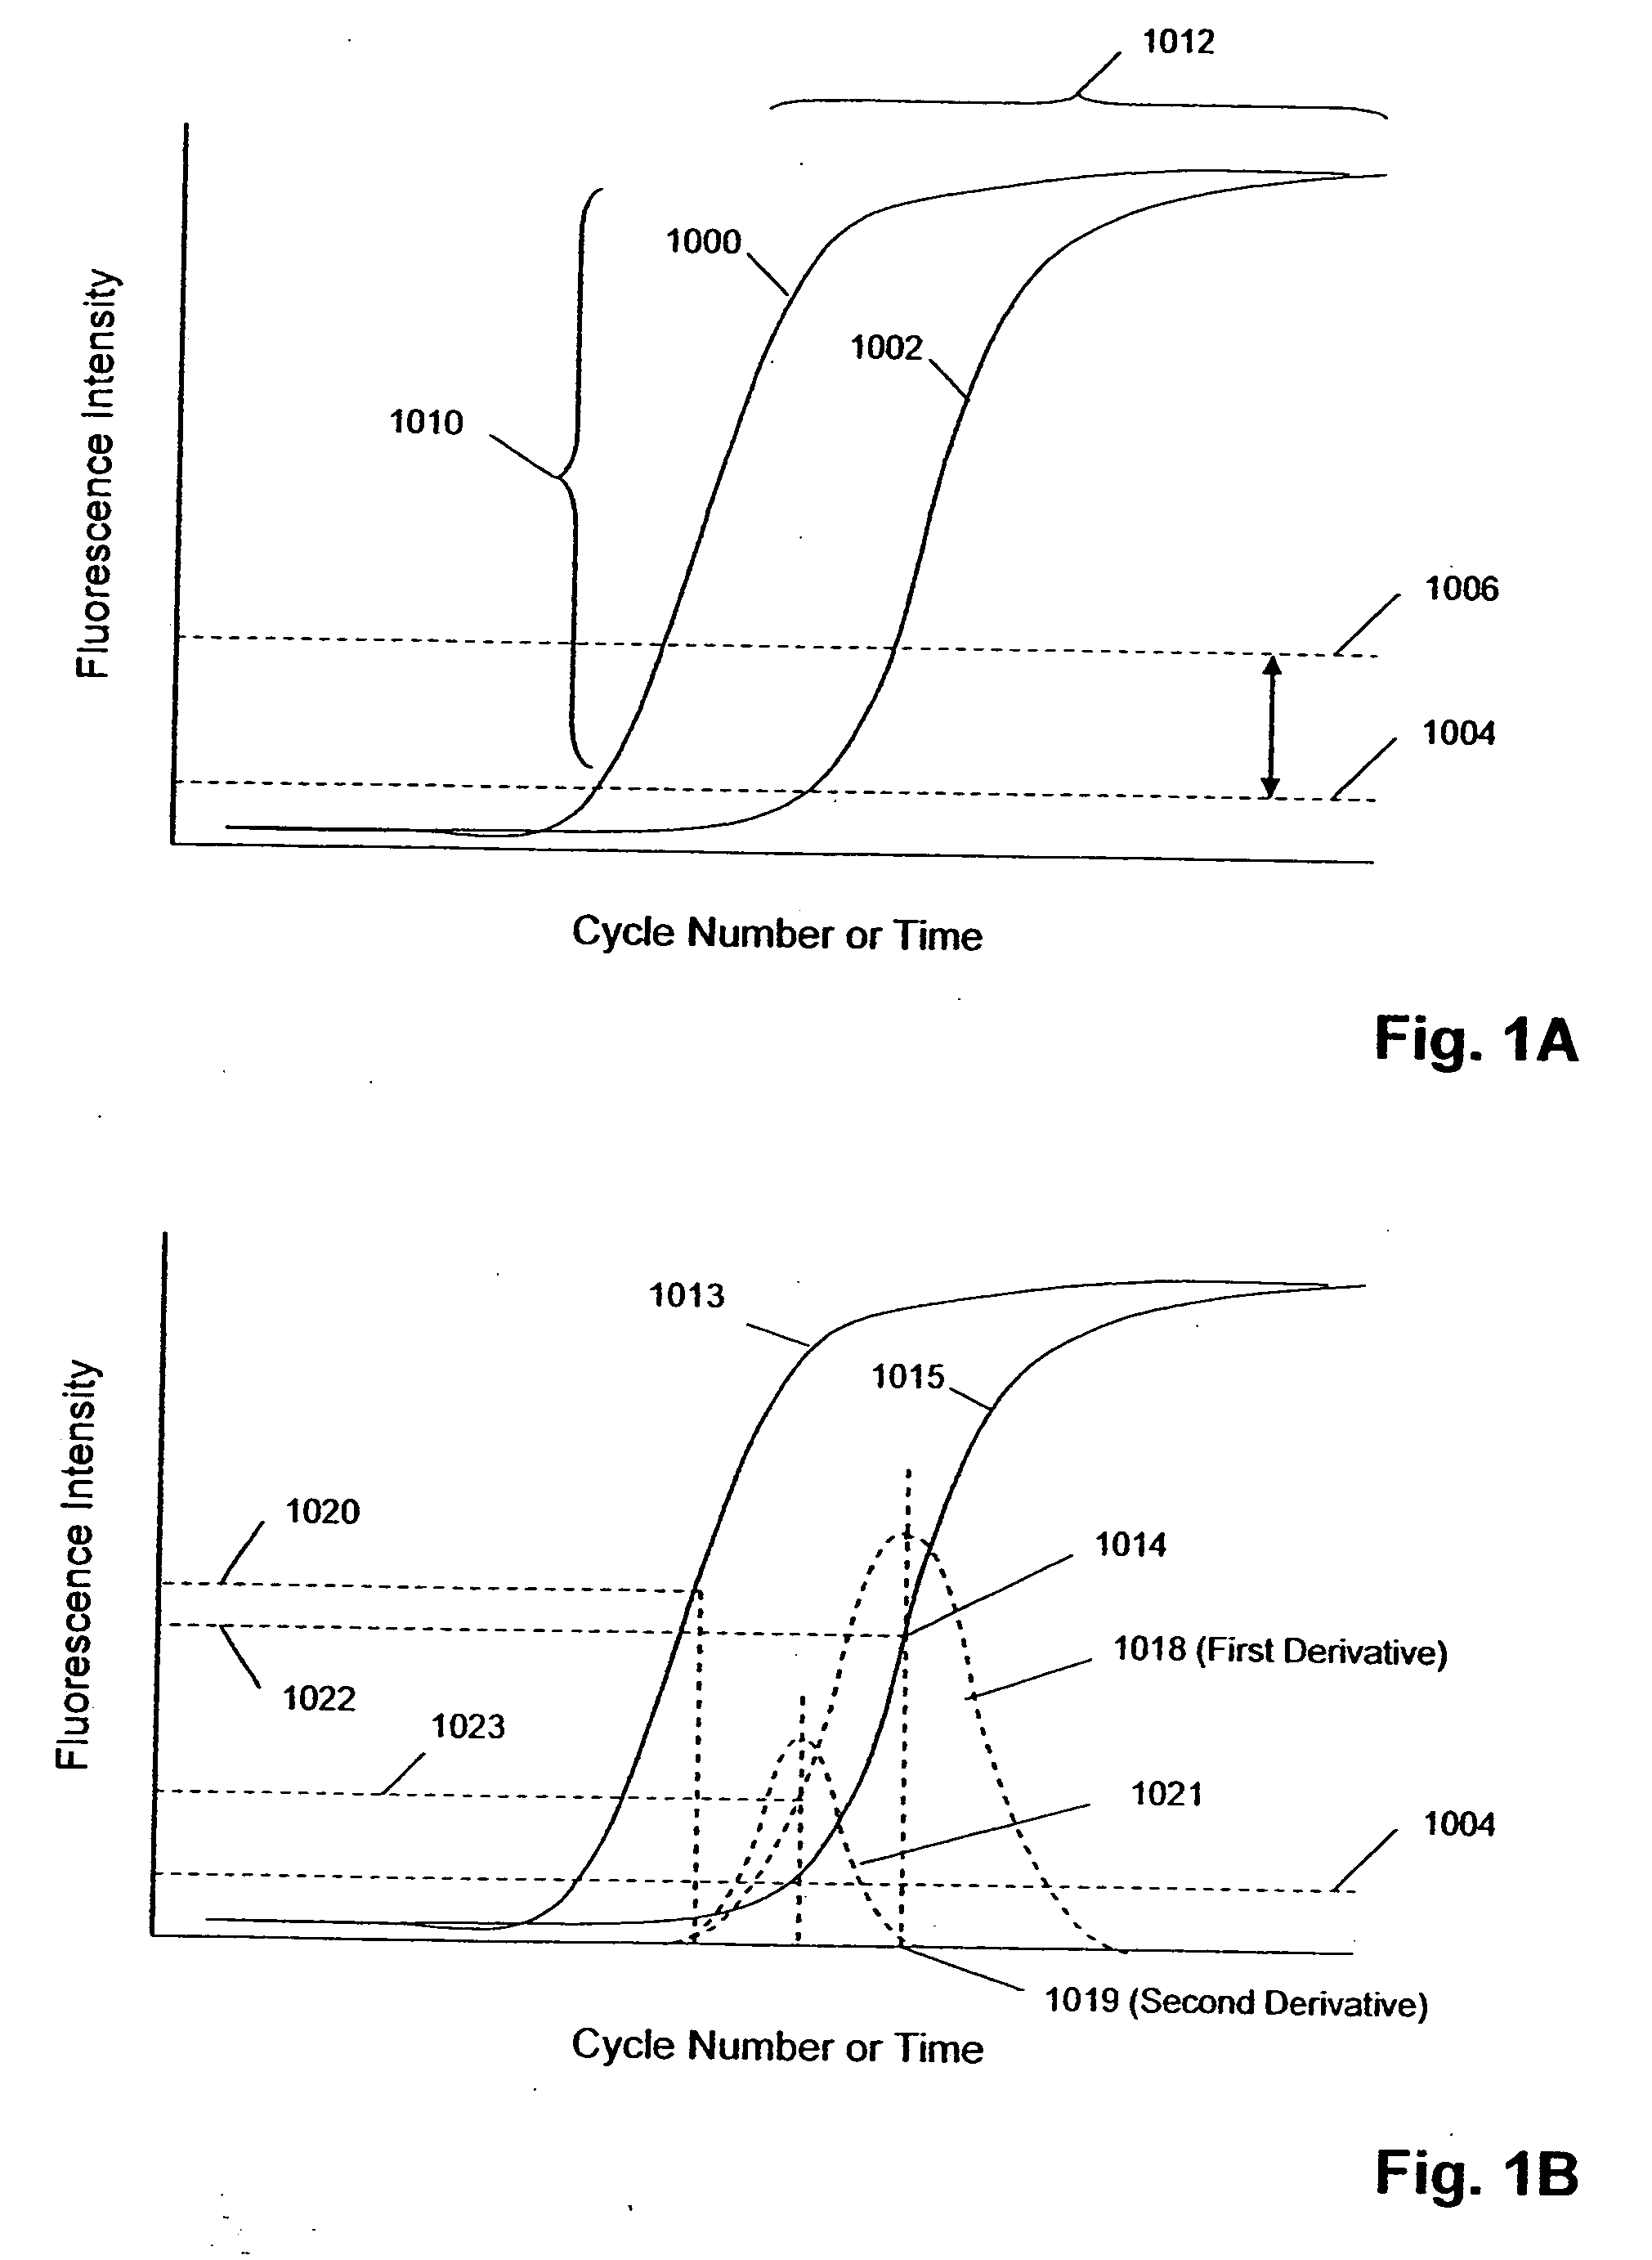 Closed-system multi-stage nucleic acid amplification reactions